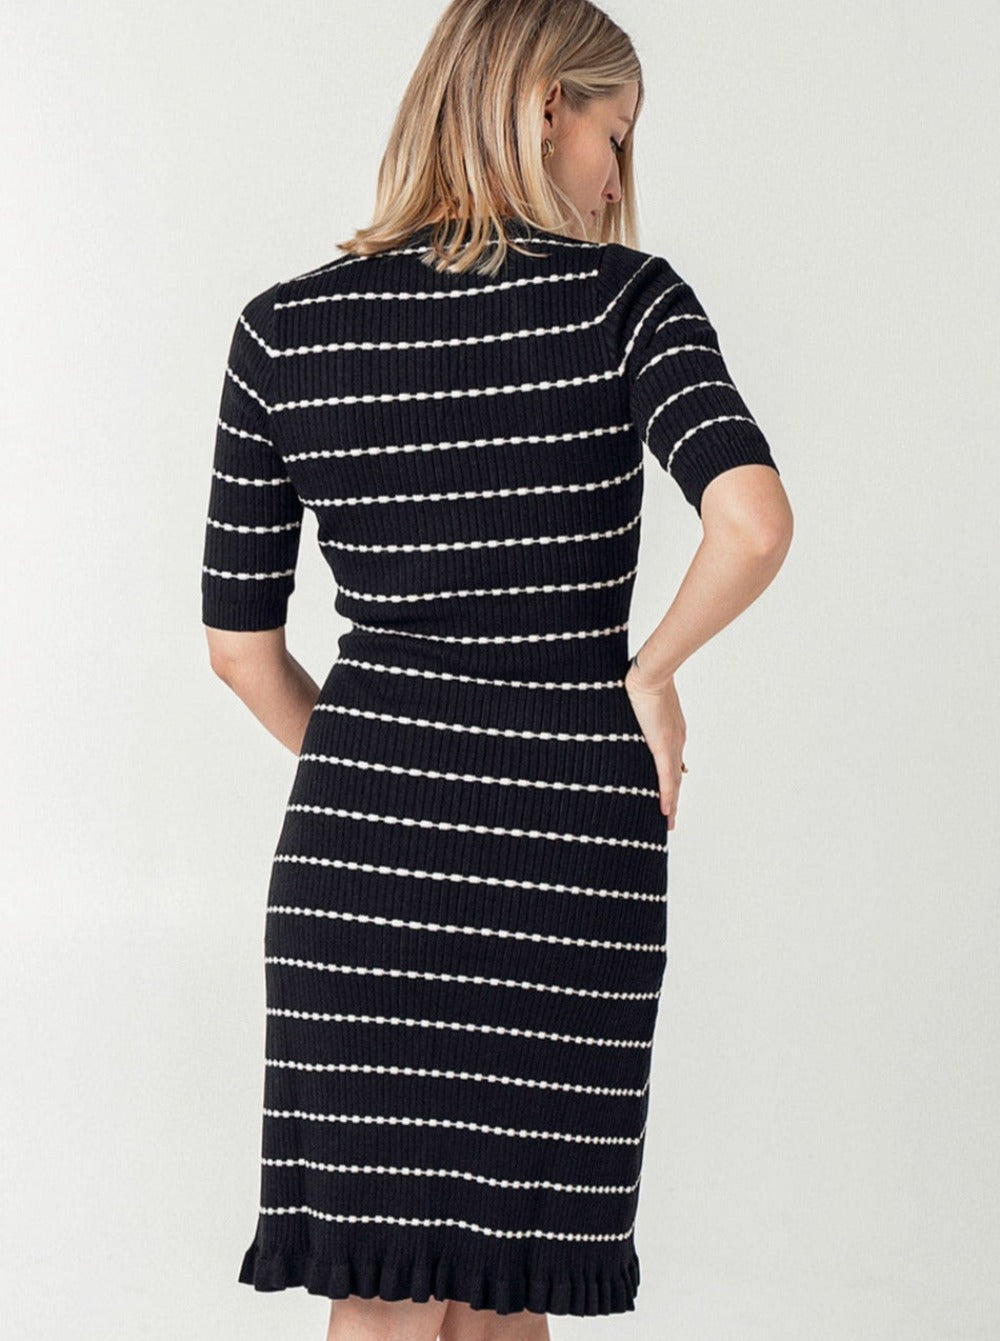 Striped knit maternity dress. This flattering pregnancy dress by MARION features 3/4 sleeves, luxury cotton knit fabric, classic round neck, and feminine hemline. Maternity workwear, maternity wedding guest dress, or baby shower dress. Petite friendly.